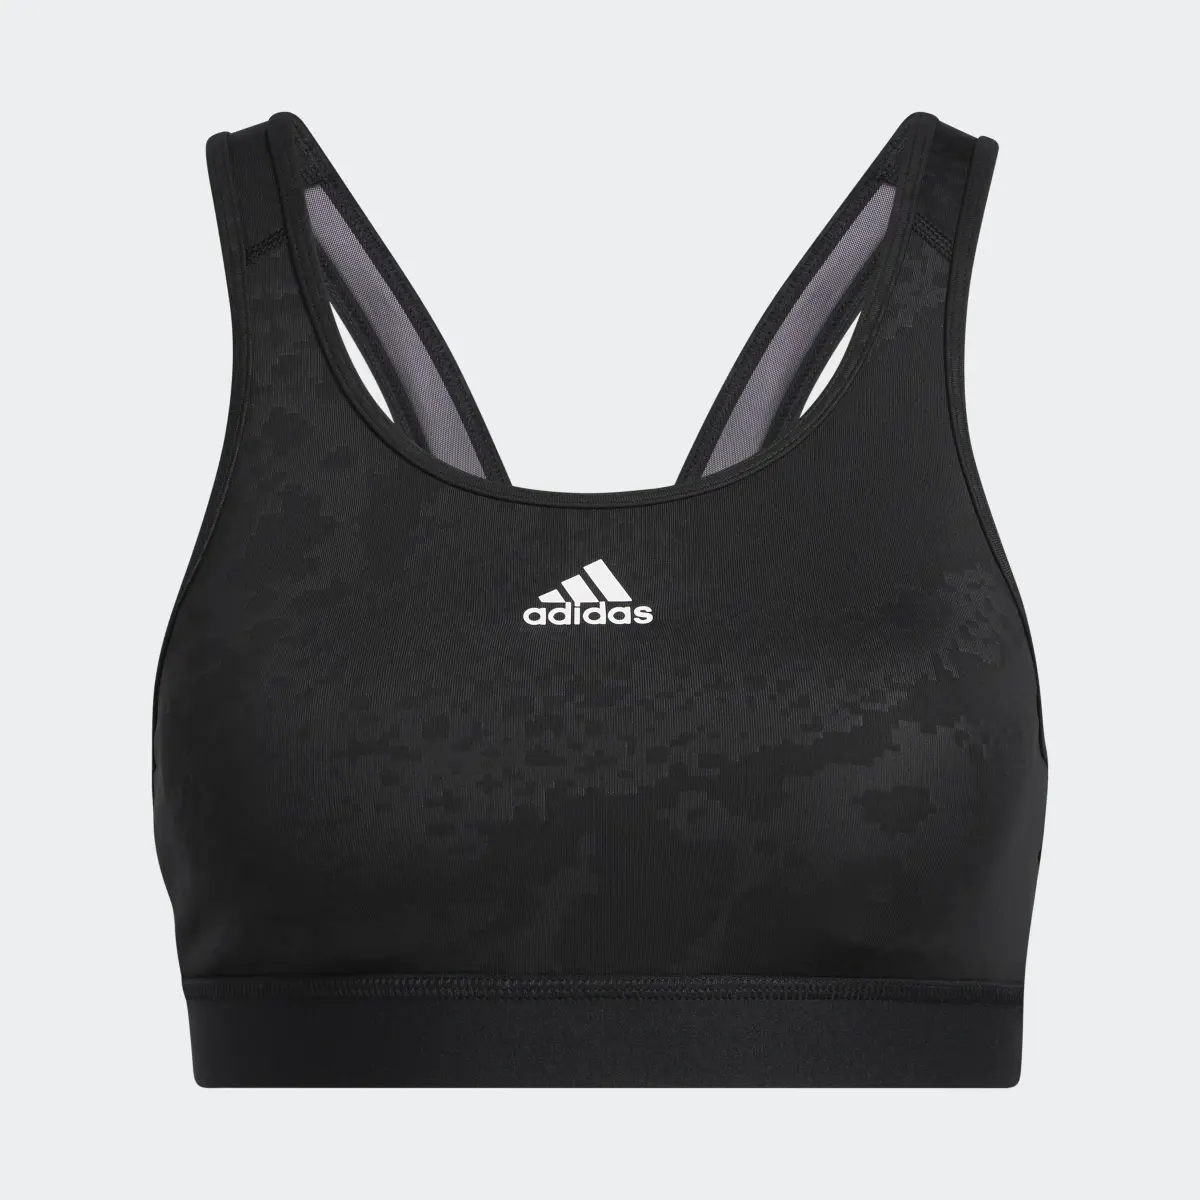 Adidas Believe This Medium-Support Lace Camo Workout Bra. 1